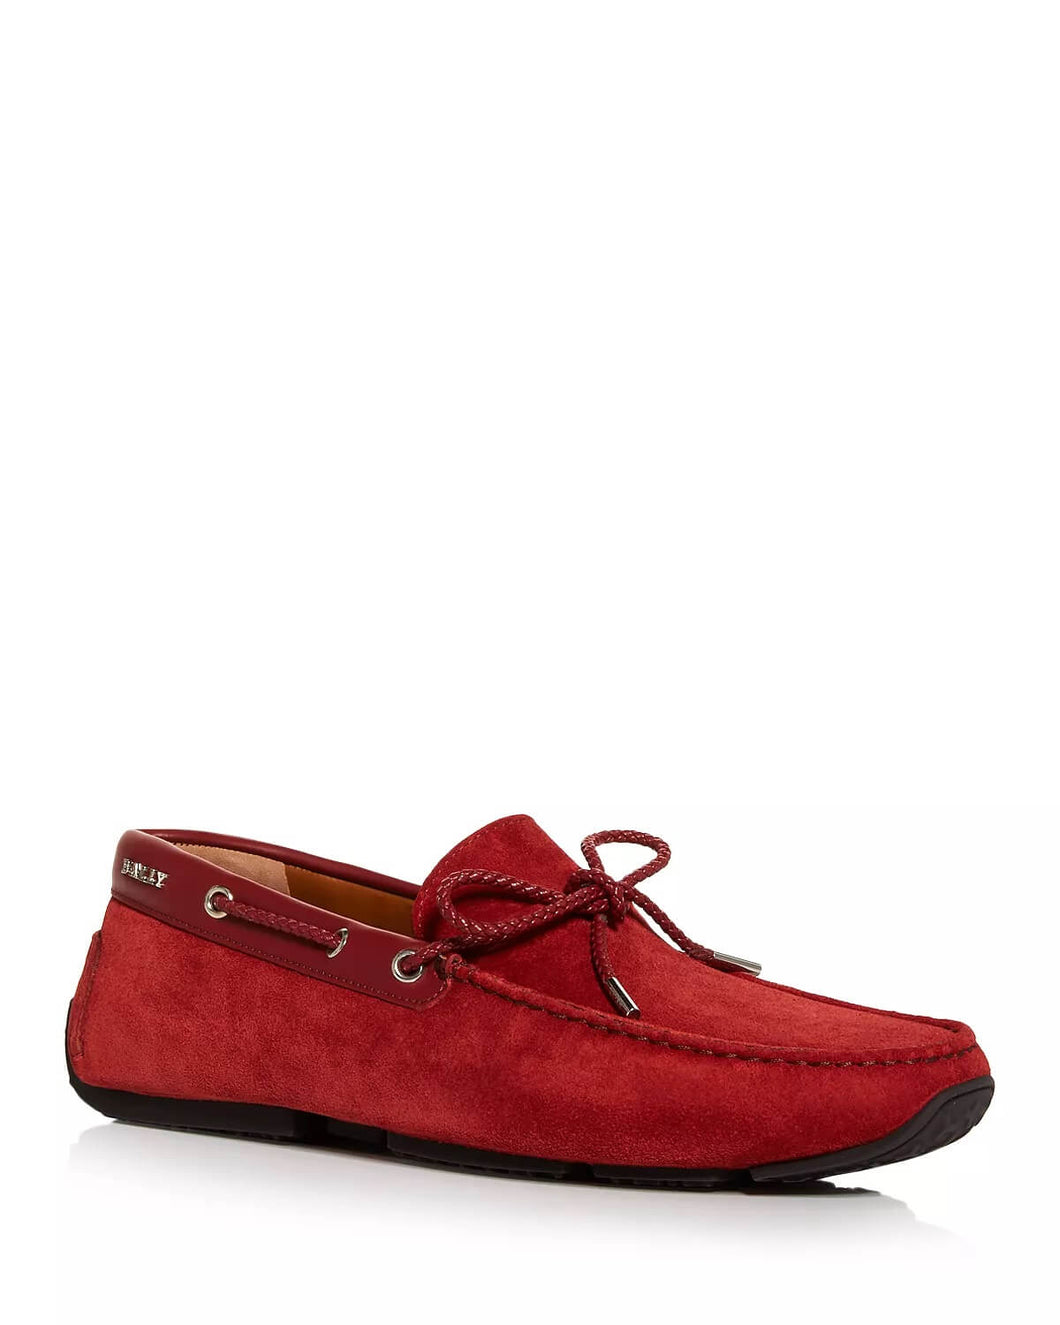 NEW Bally Pindar Men's 6231347 Red Leather Suede Drivers US 10 MSRP $475